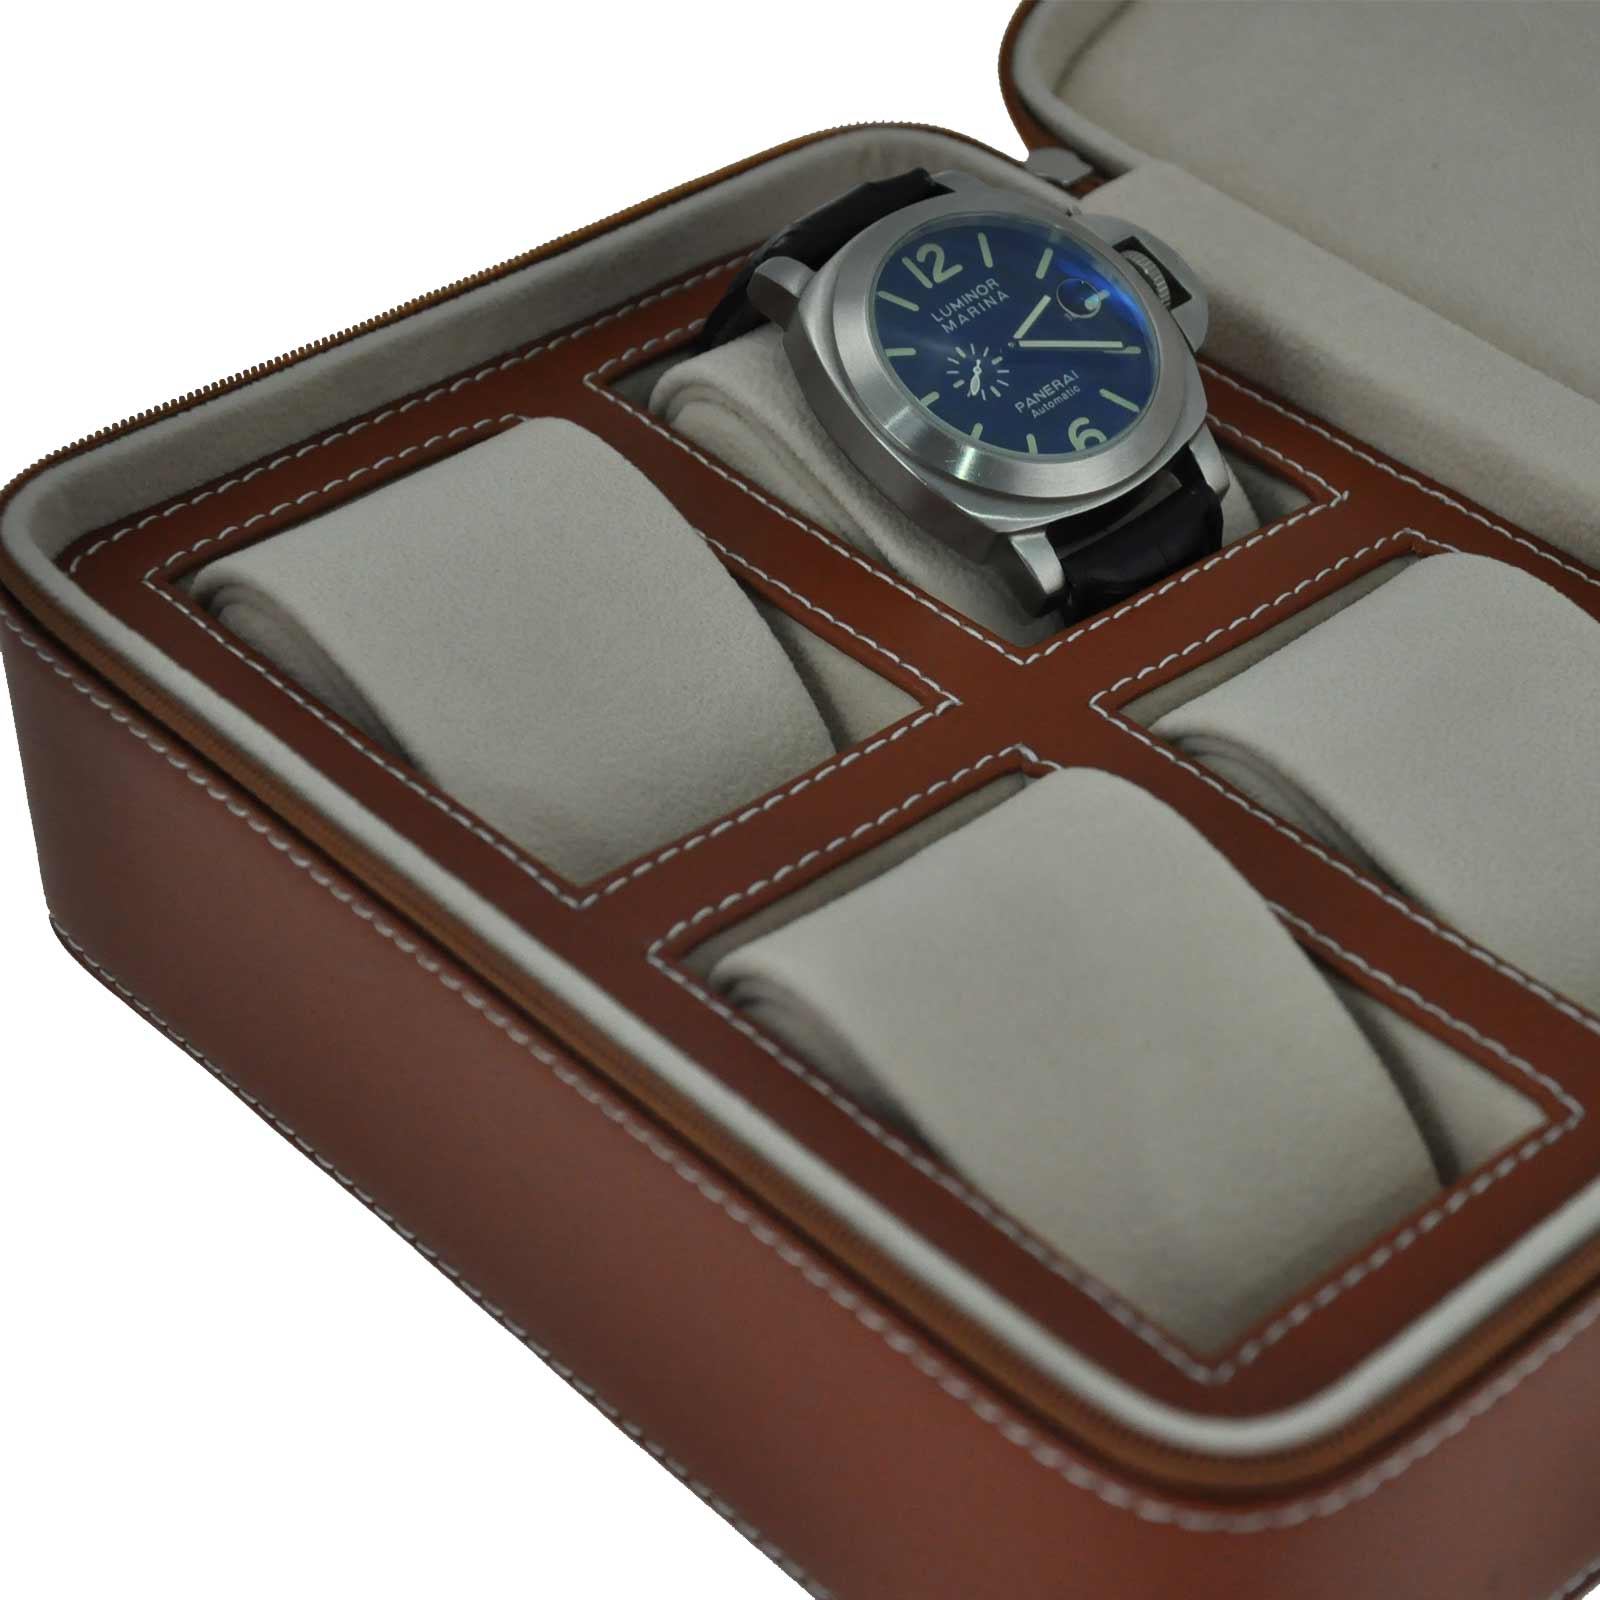 Luxury Travel watch case Genuine top Leather brown